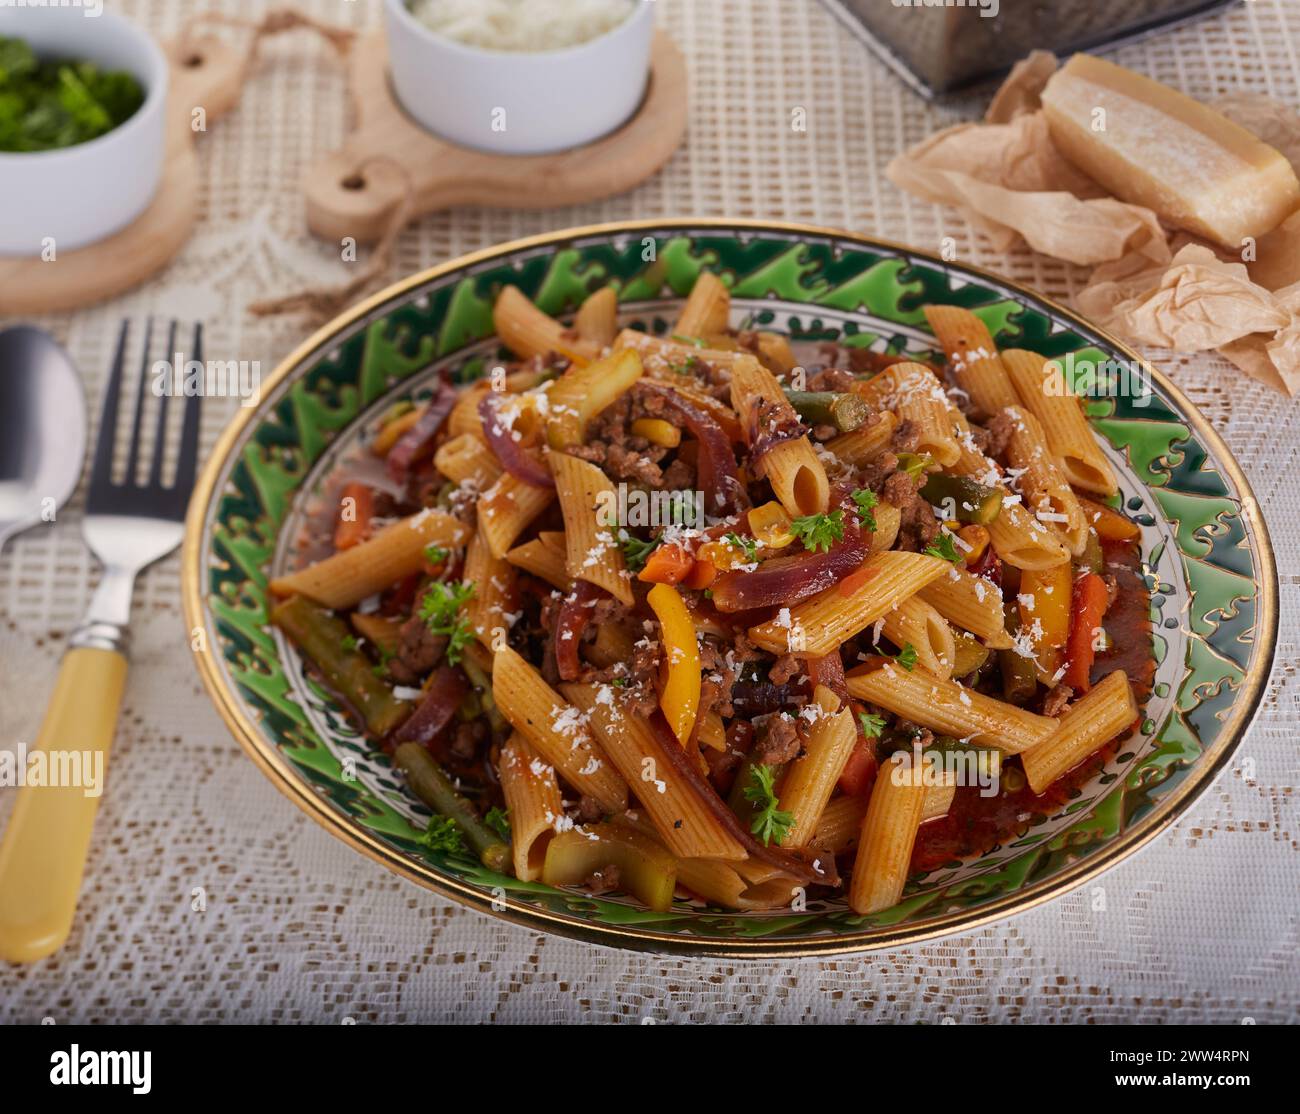 Pasta bolognese garnished with herbs and grated cheese. Stock Photo